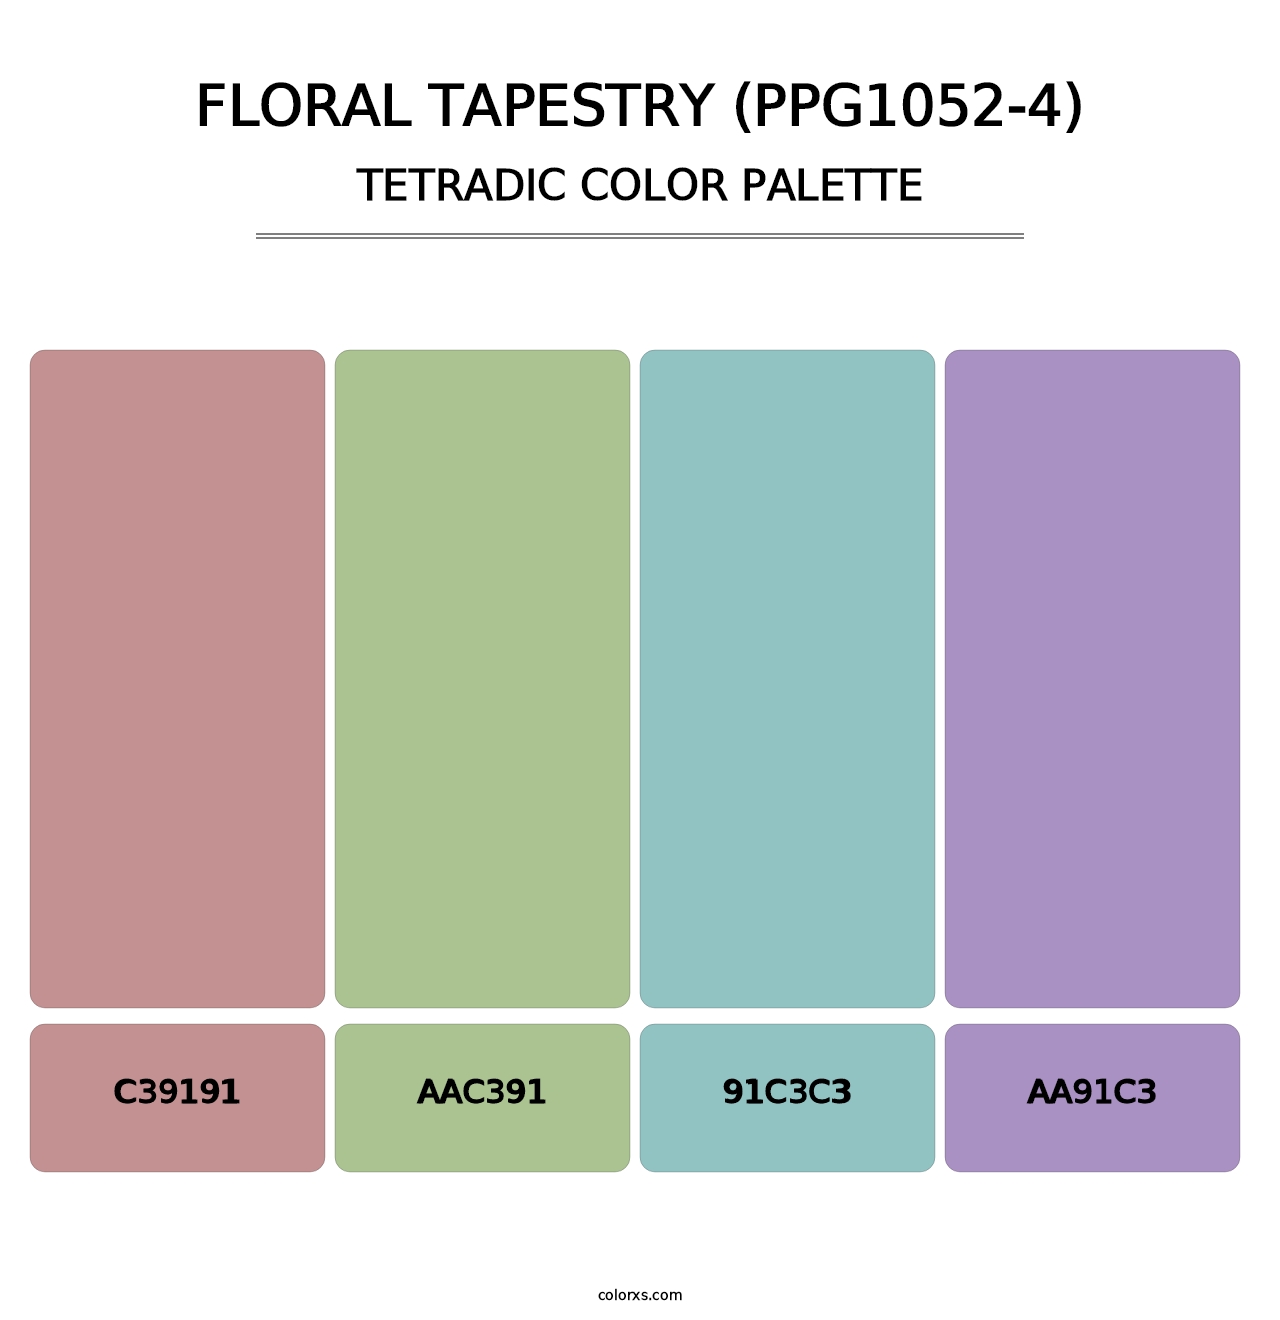 Floral Tapestry (PPG1052-4) - Tetradic Color Palette